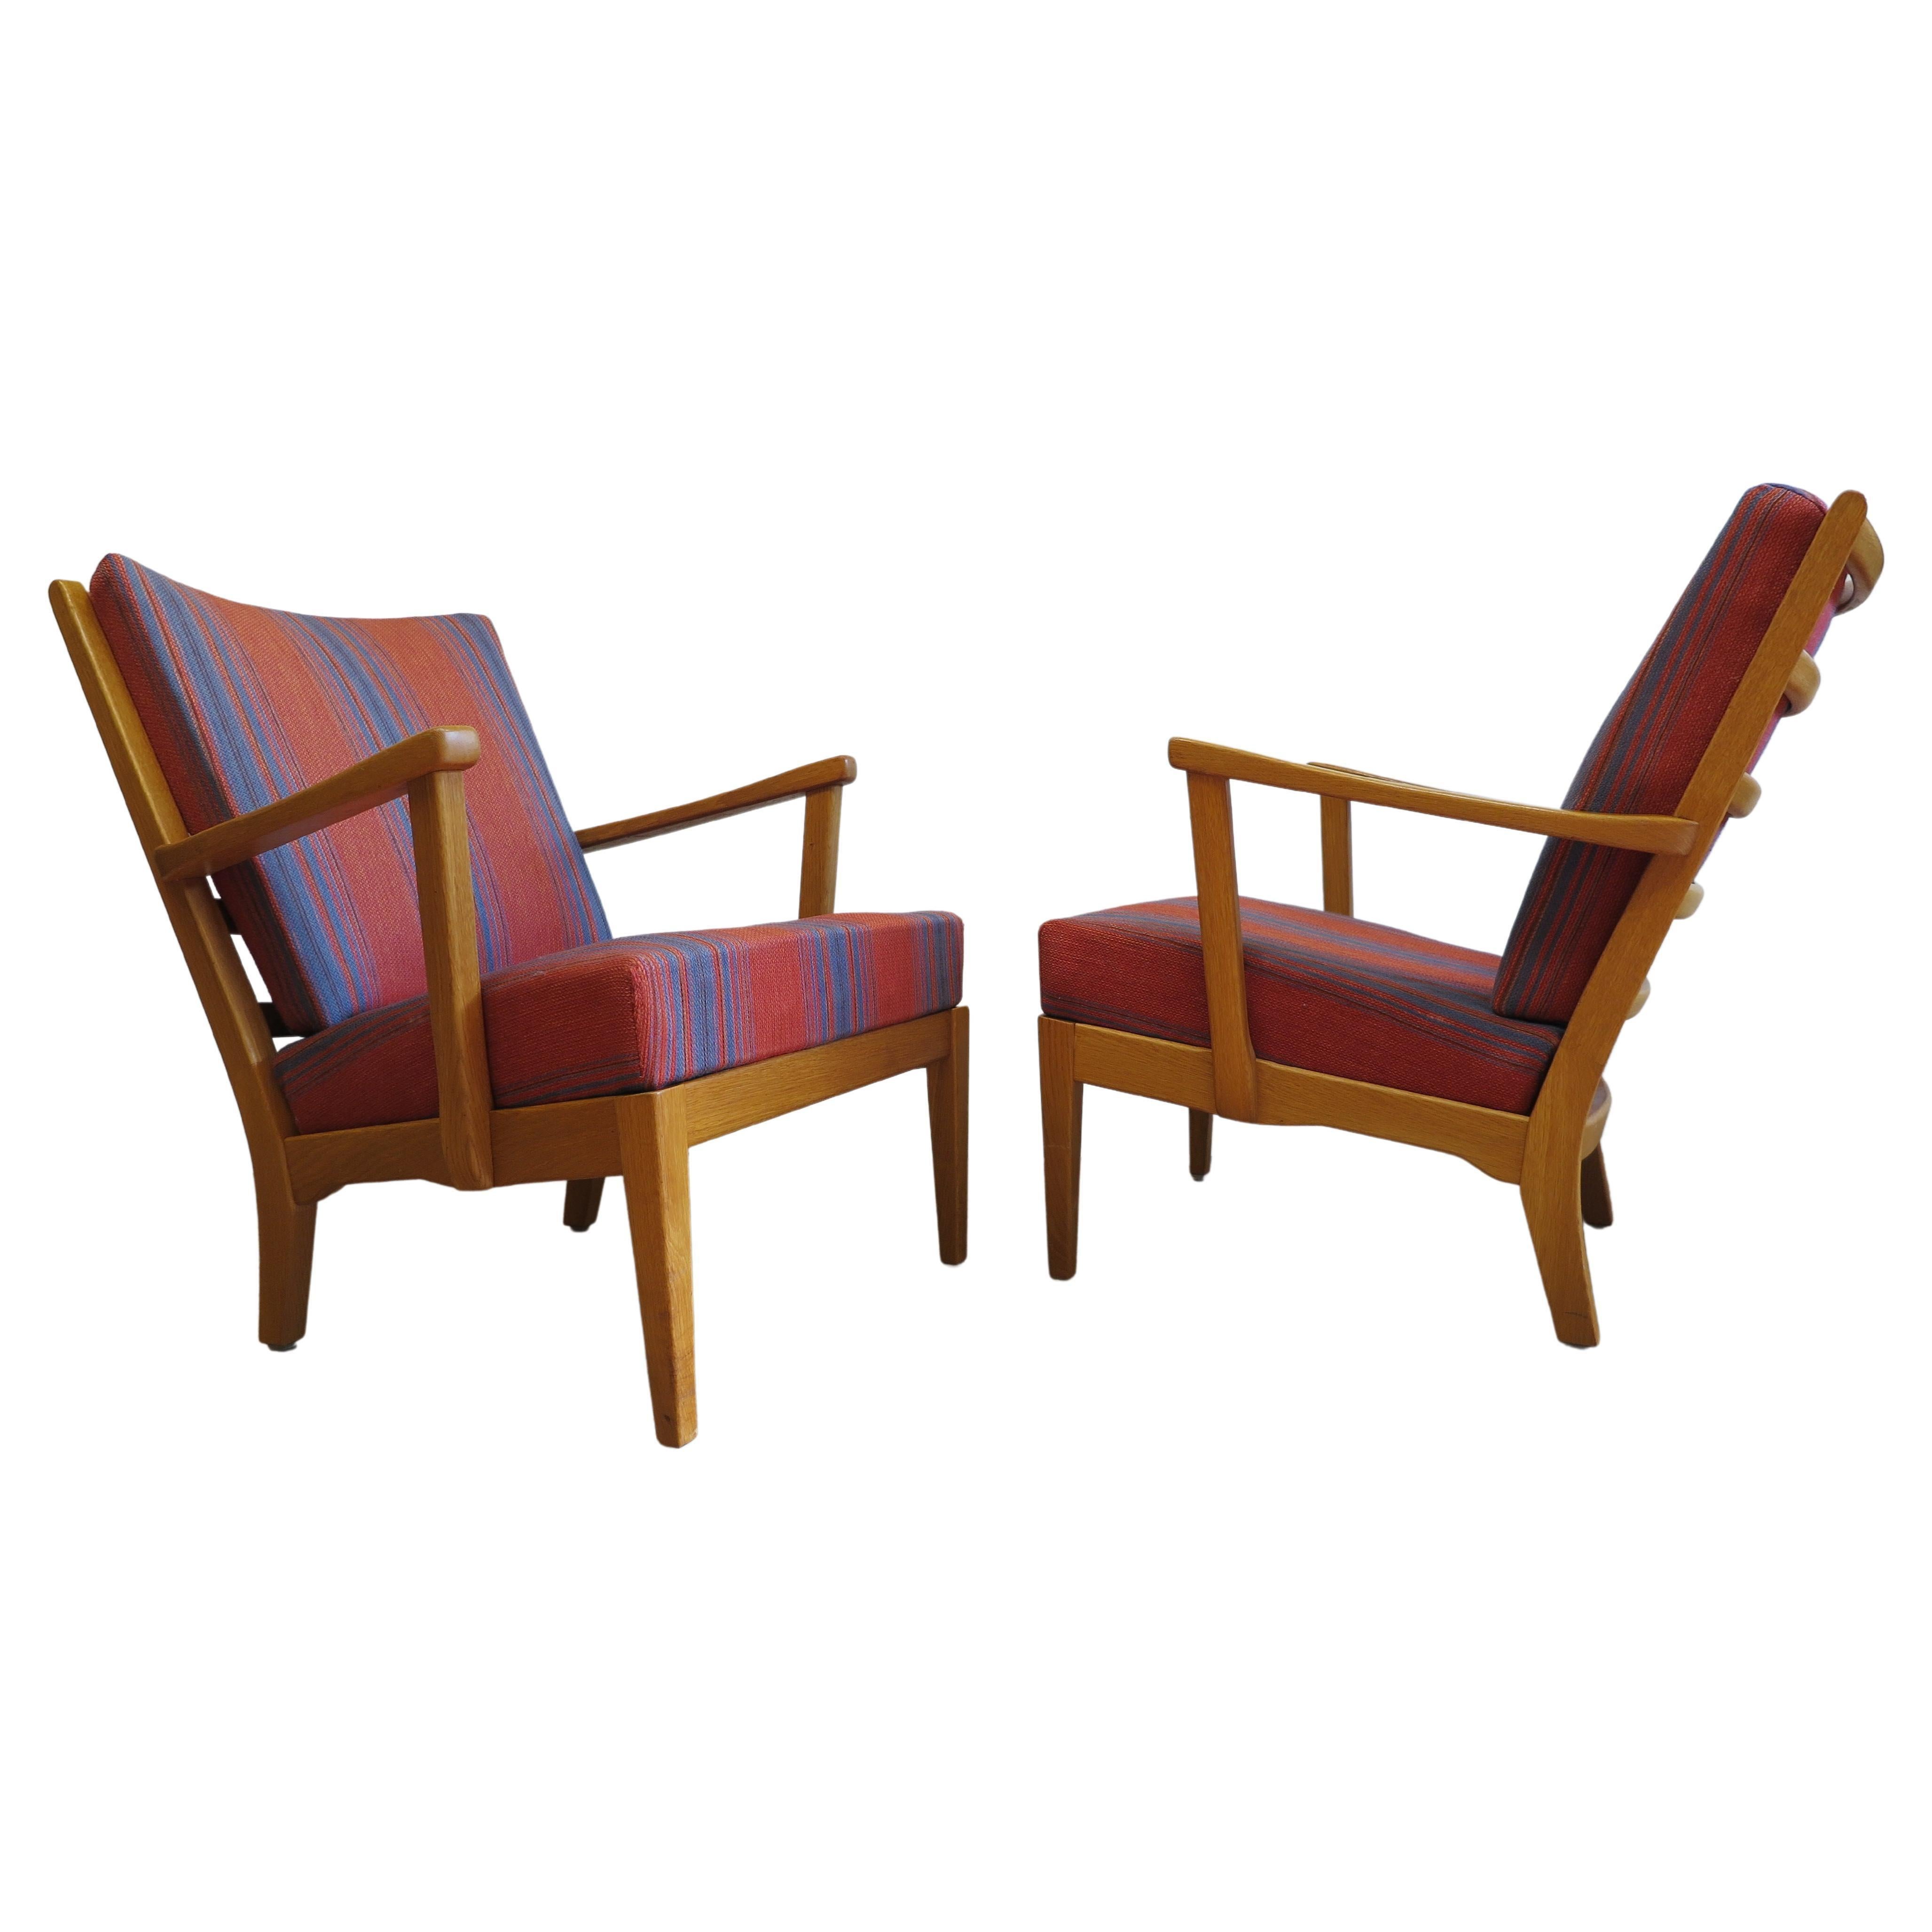 A Pair of Carl Malmsten Visingo Chairs all original. A spectacular pair of Carl Malmsten Visingo Chairs for AB O.H. Sjogren Stoppmobler in Oak. In good original condition complete with original fabric and badges to both chairs. Slight nicks to the